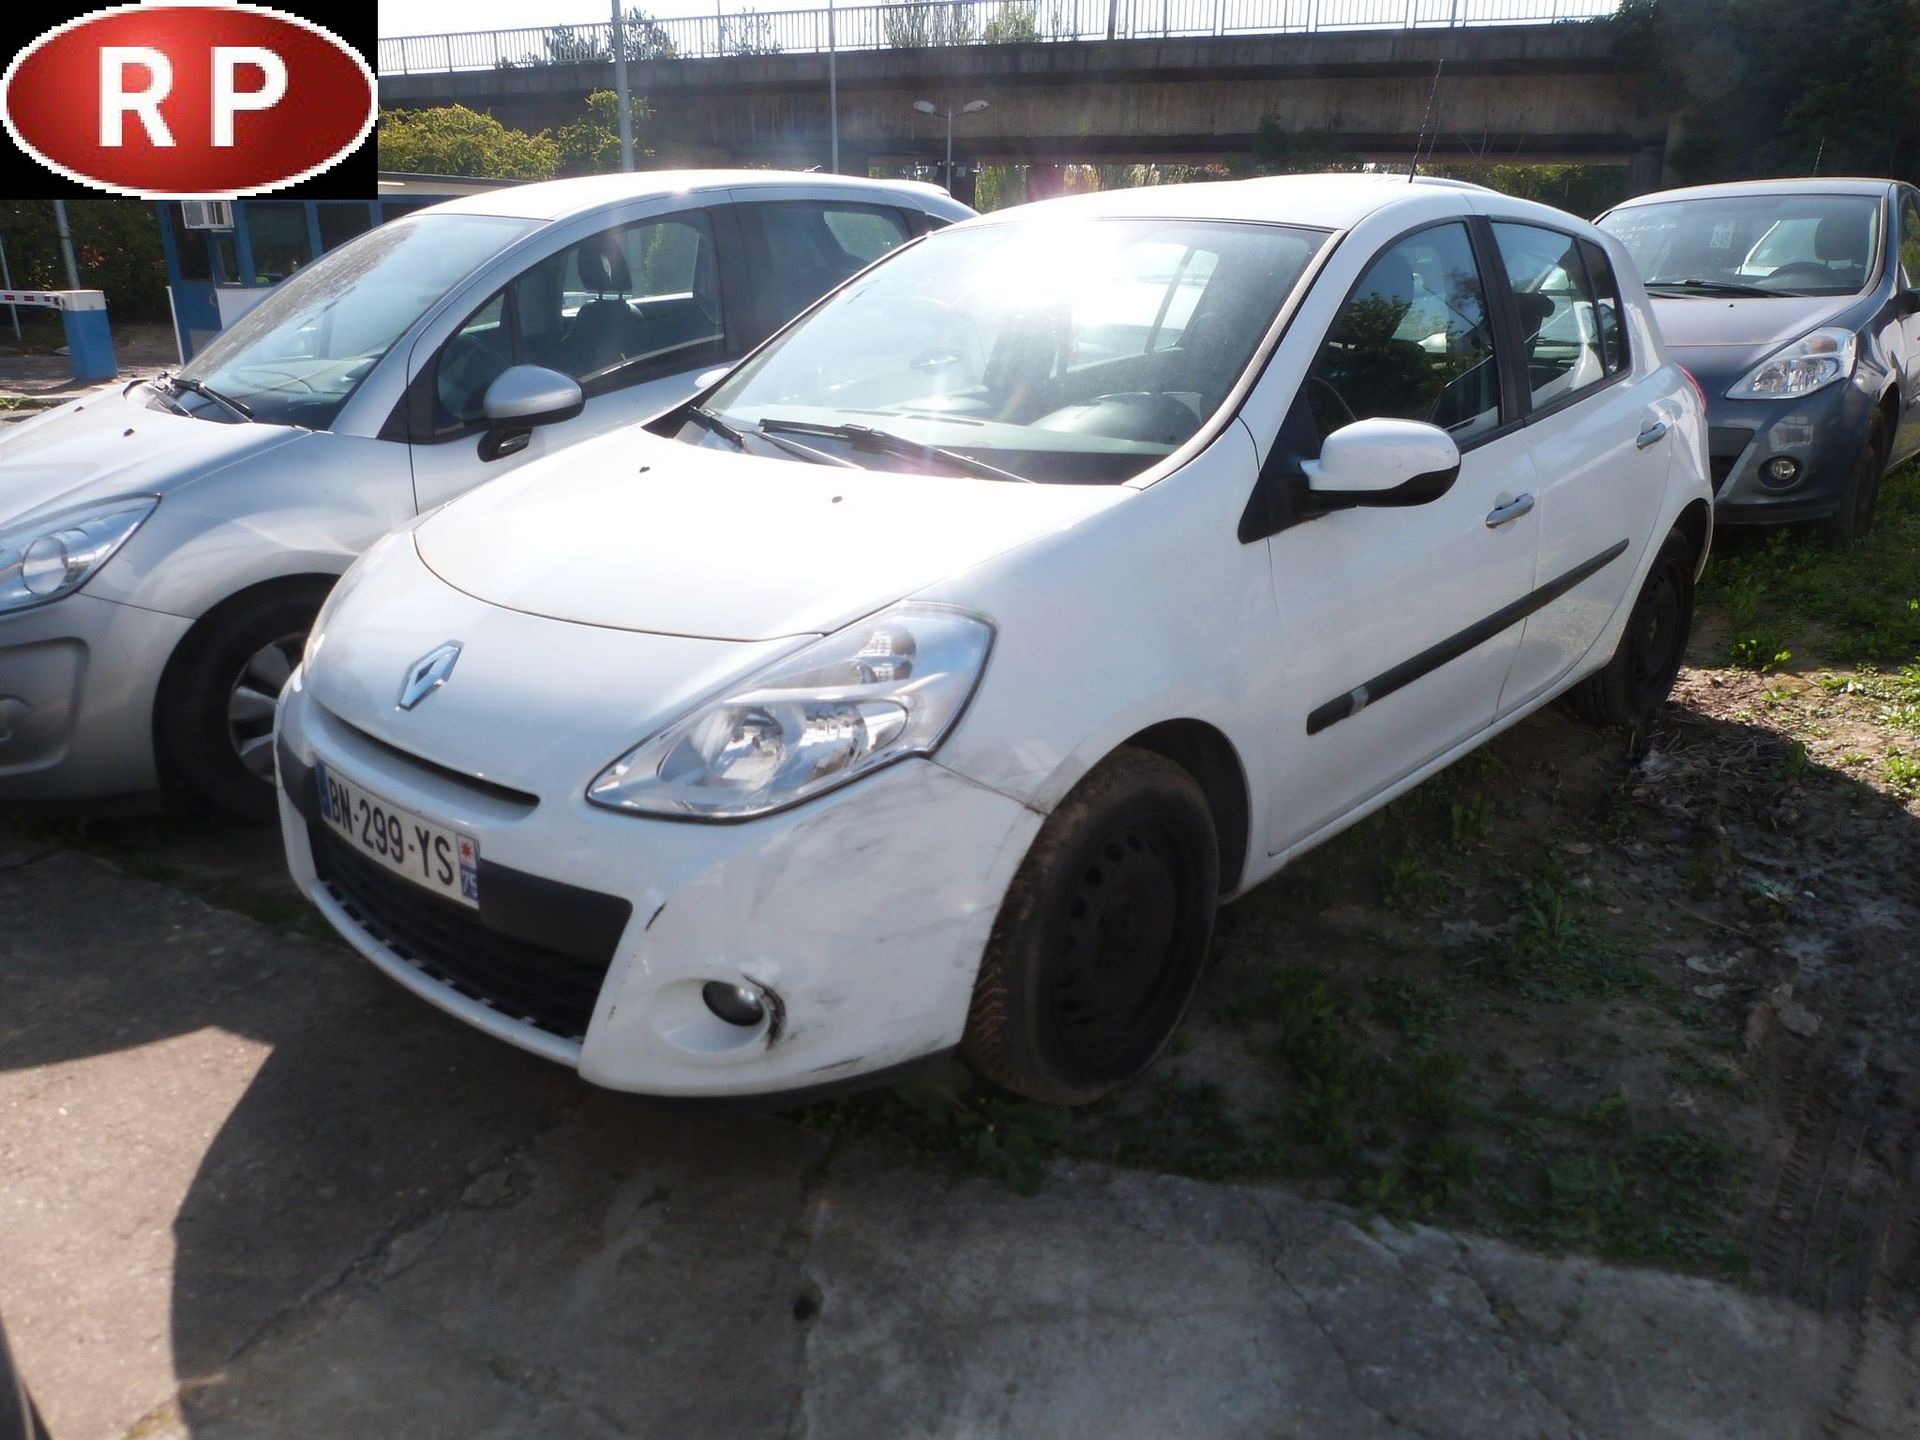 Null [RP] RENAULT Clio 1.2 i 75, Essence, imm. BN-299-YS, type M10RENVP003A579, &hellip;